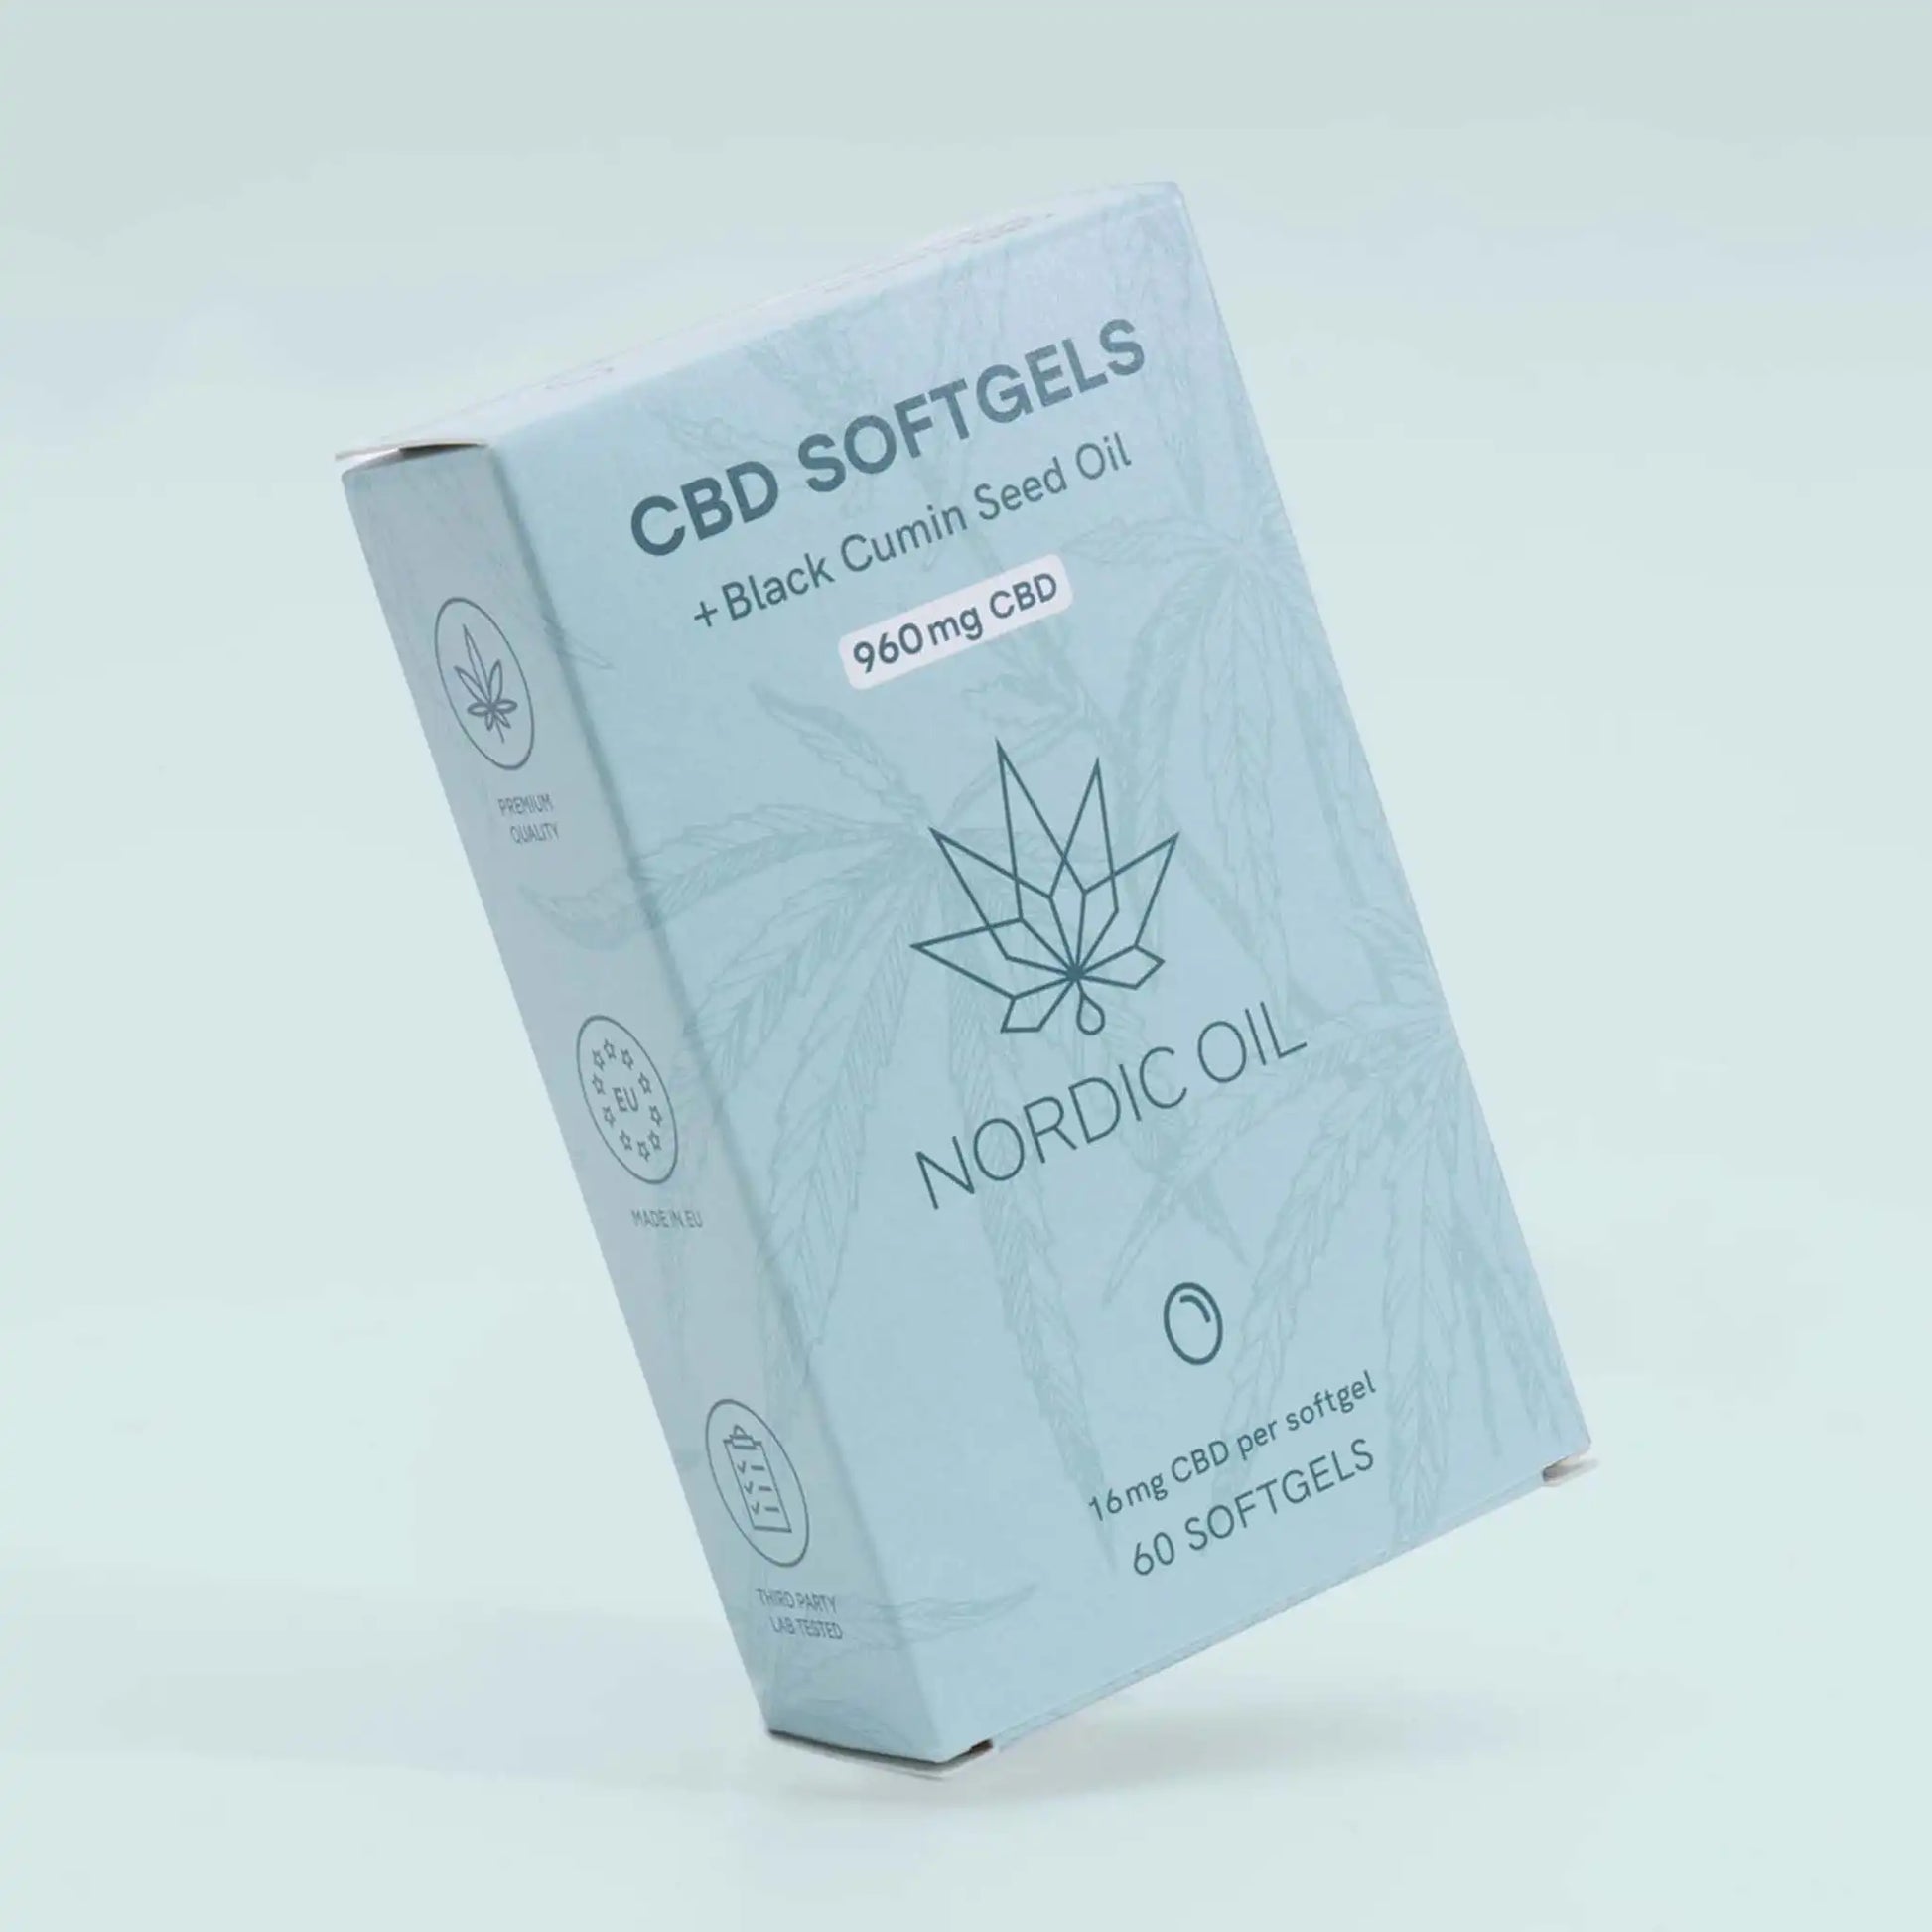 CBD 960mg capsules is on the left border, on a blue background.